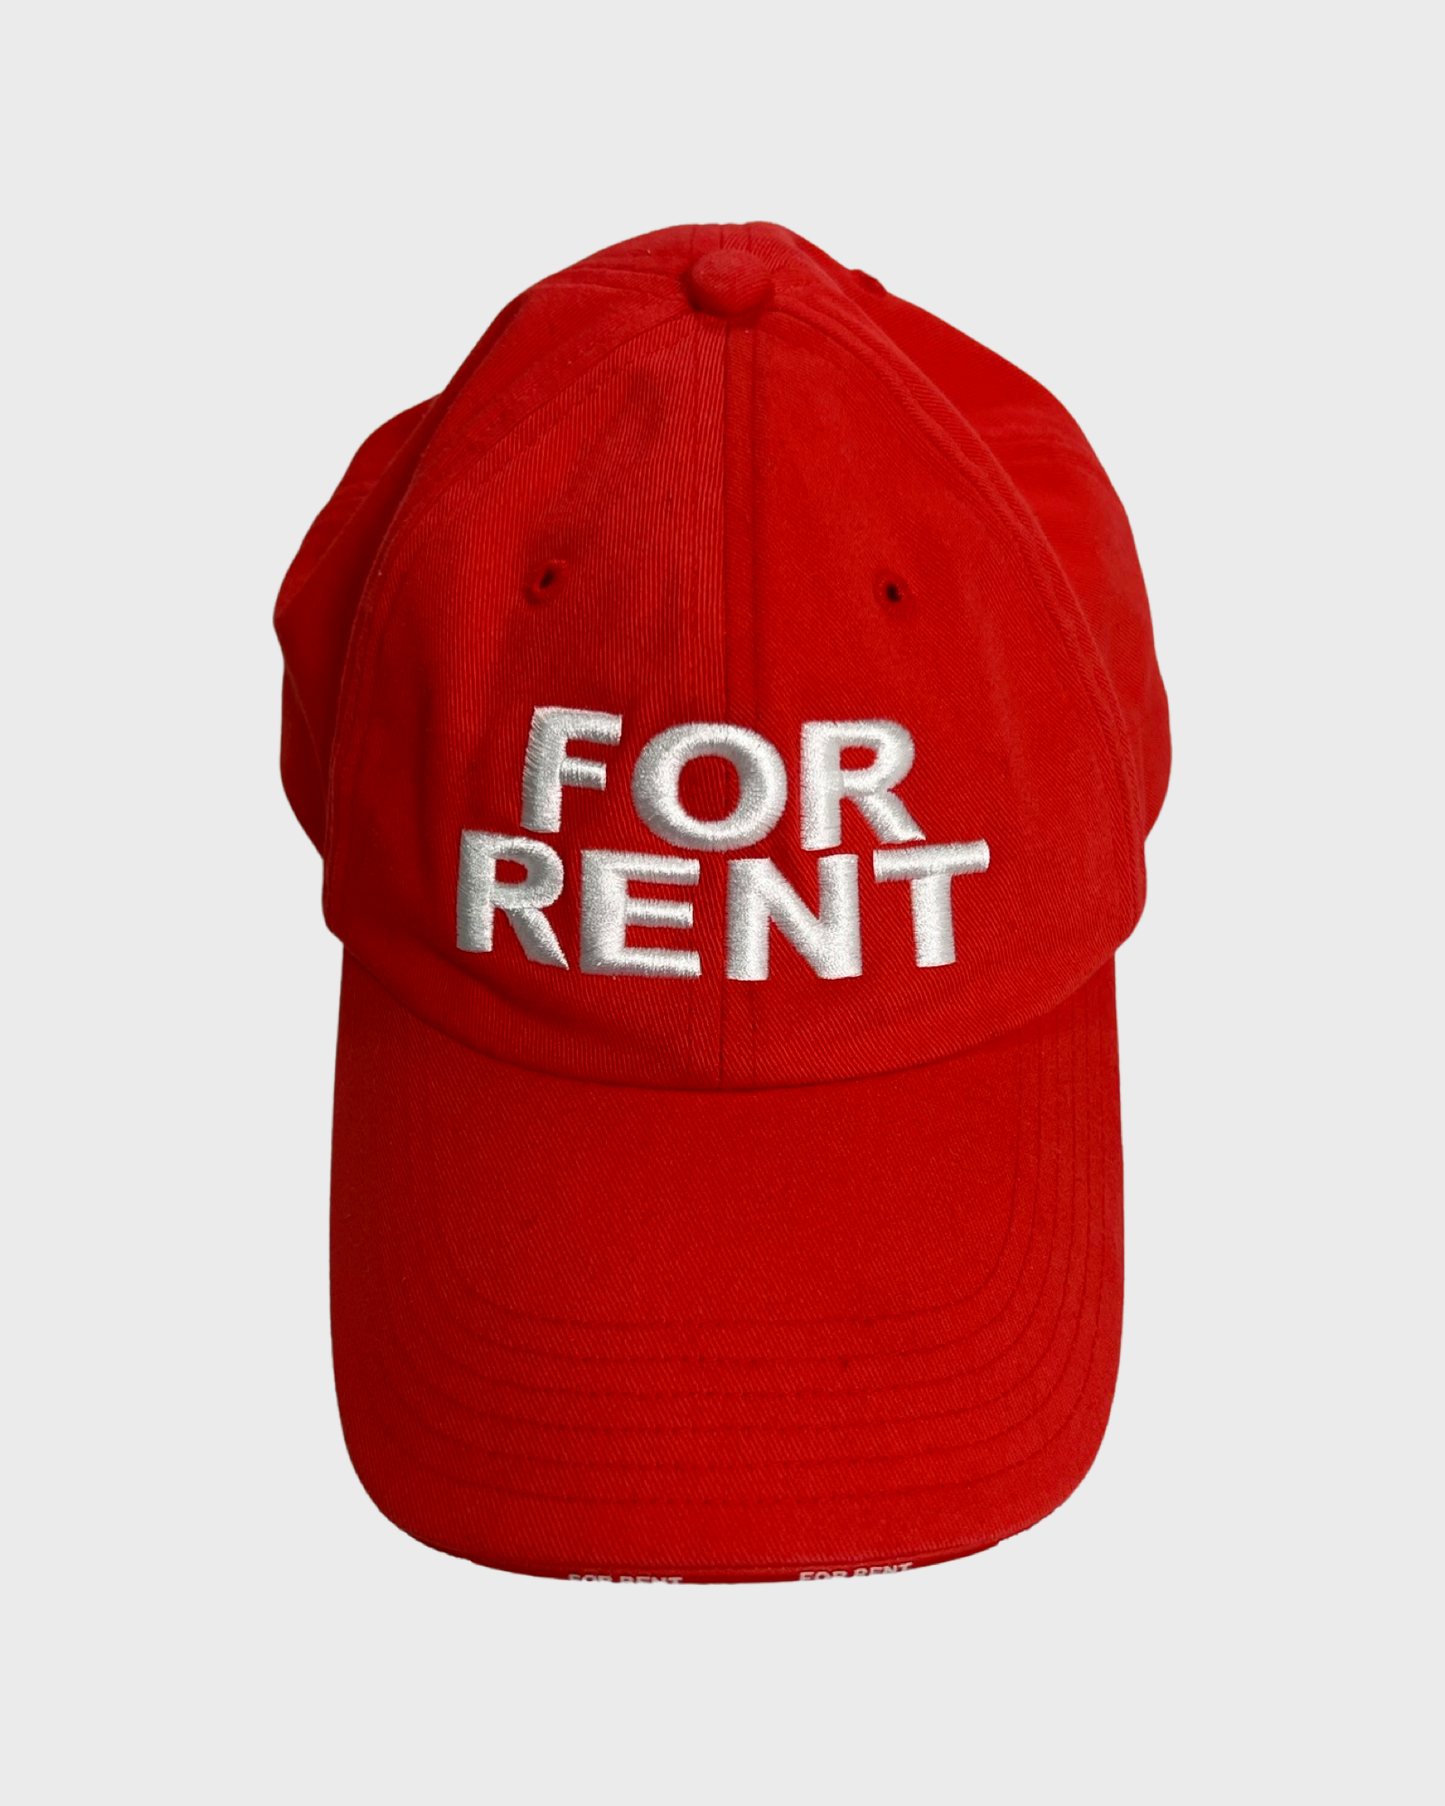 Vetements SS20 runway For Rent Cap Hat in red SZ:OS